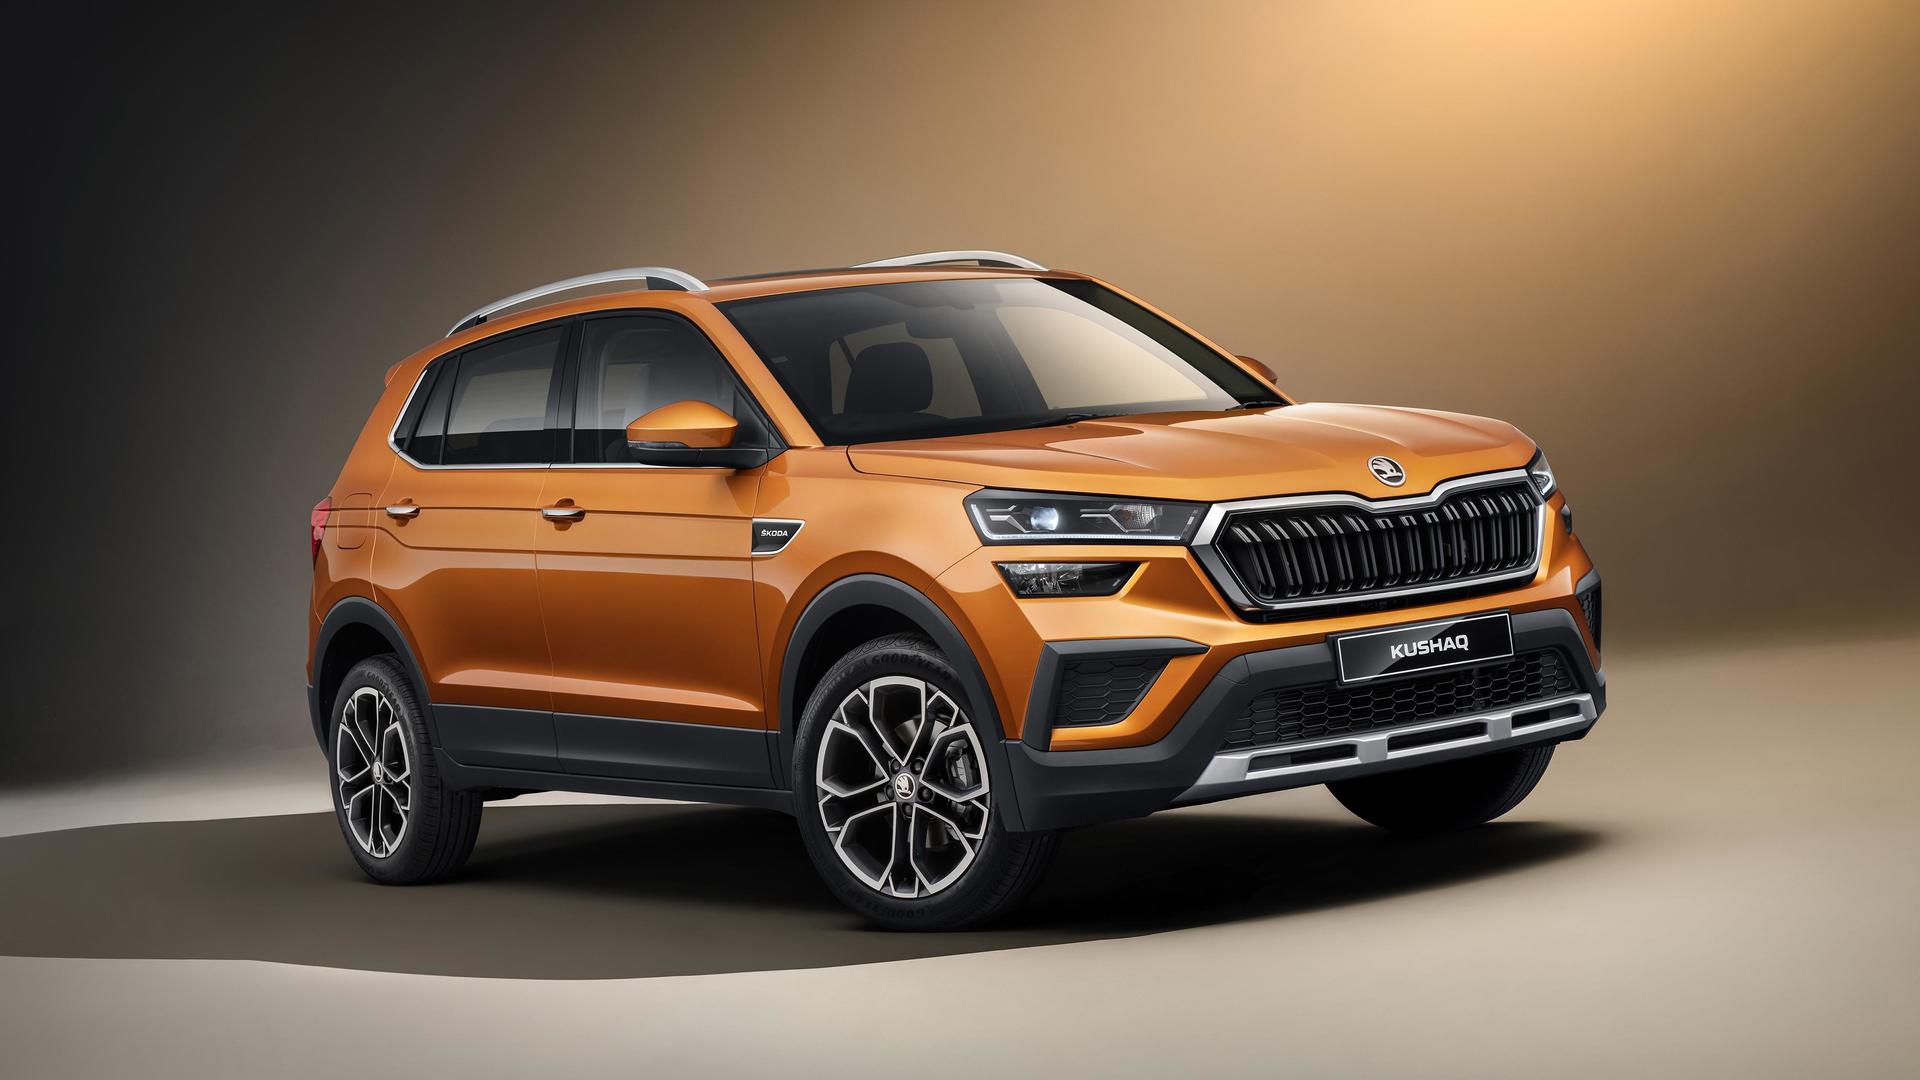 SKODA KUSHAQ becomes costlier in India: Check new prices